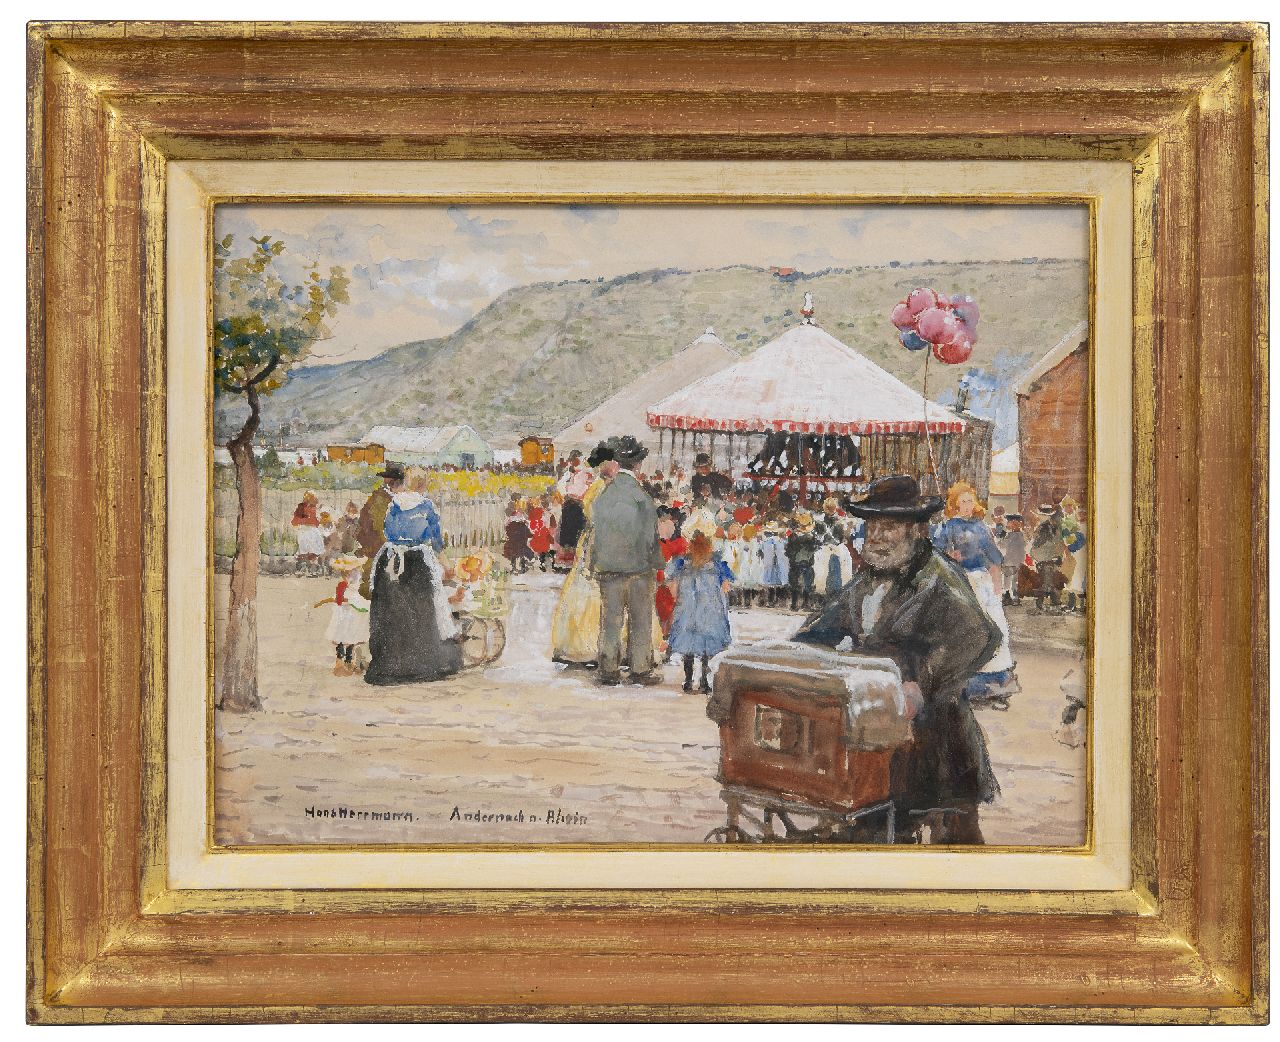 Hermann H.E.R.  | Hans Emil Rudolf Hermann | Watercolours and drawings offered for sale | Fair in Andernach at the Rhine, watercolour and gouache on paper 26.8 x 36.3 cm, signed l.l.